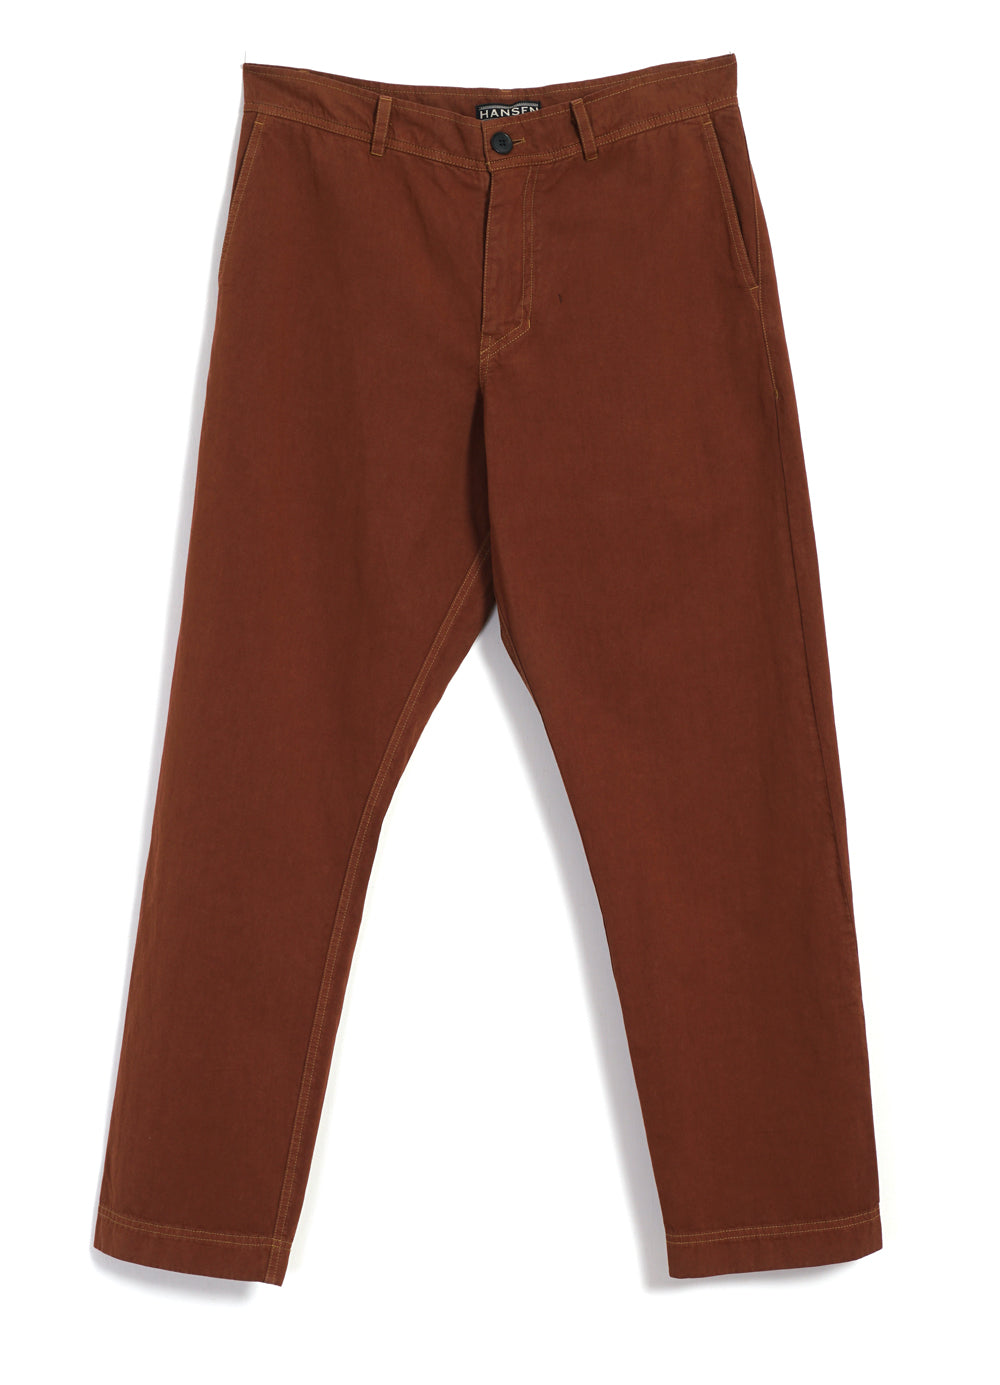 TYGE | Wide Cut Cropped Trousers | Brick